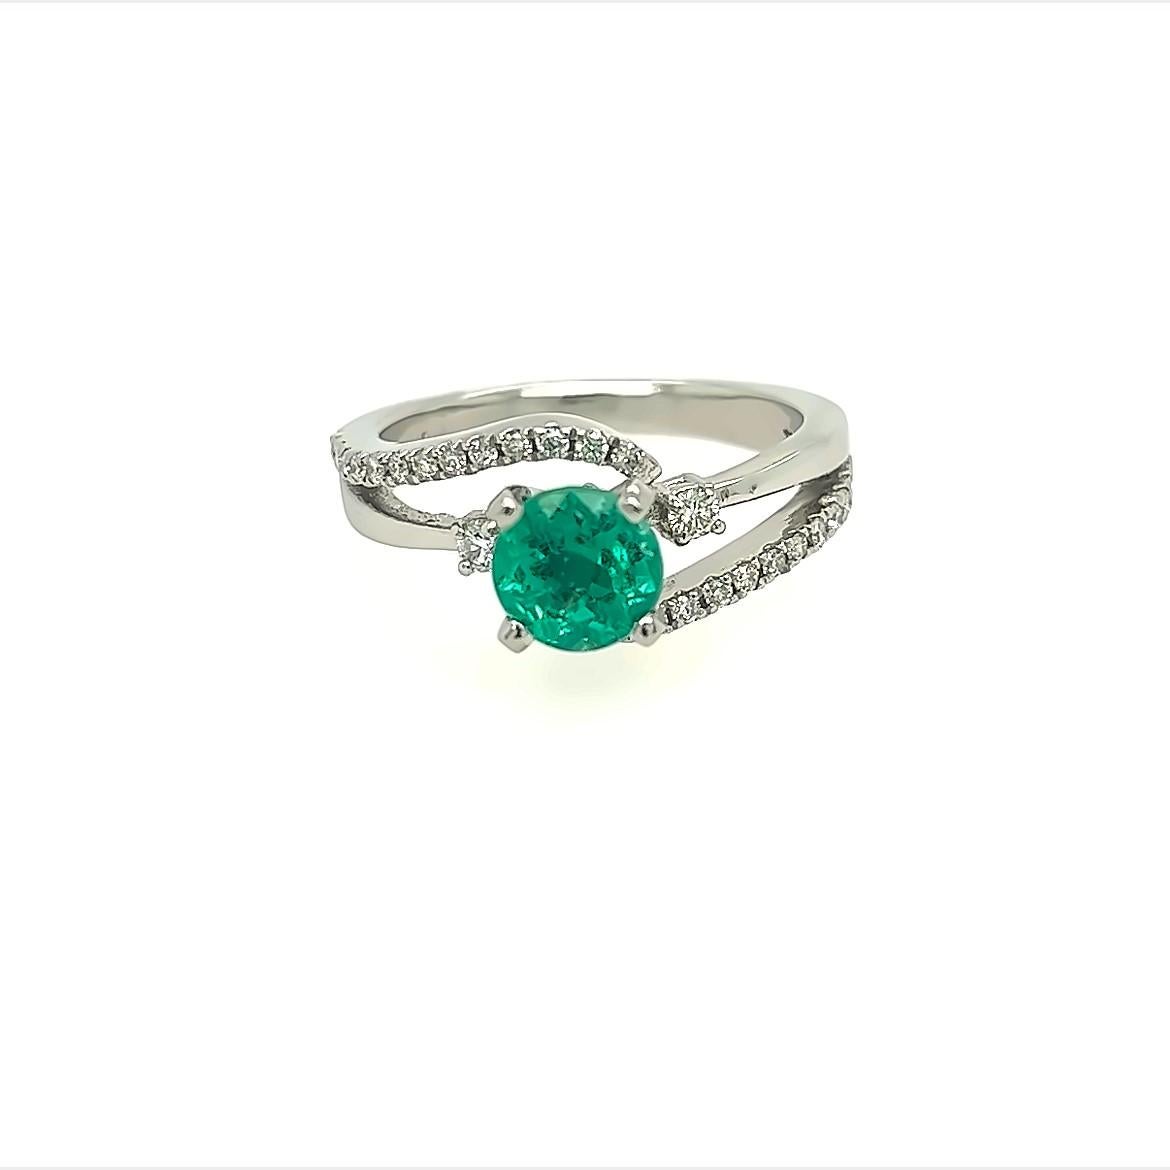 GIA Certified Muzo Mined  1.06 Carats AAAAA  Beautilful  Colombian Round  Emerald With the Color Of Vivid Green ,and a slight tint of Blueish Color, Famous from the Muzo Mine. Very Brightly  VS2 Diamonds surrounding This  Ring In 6.5 grams of .994